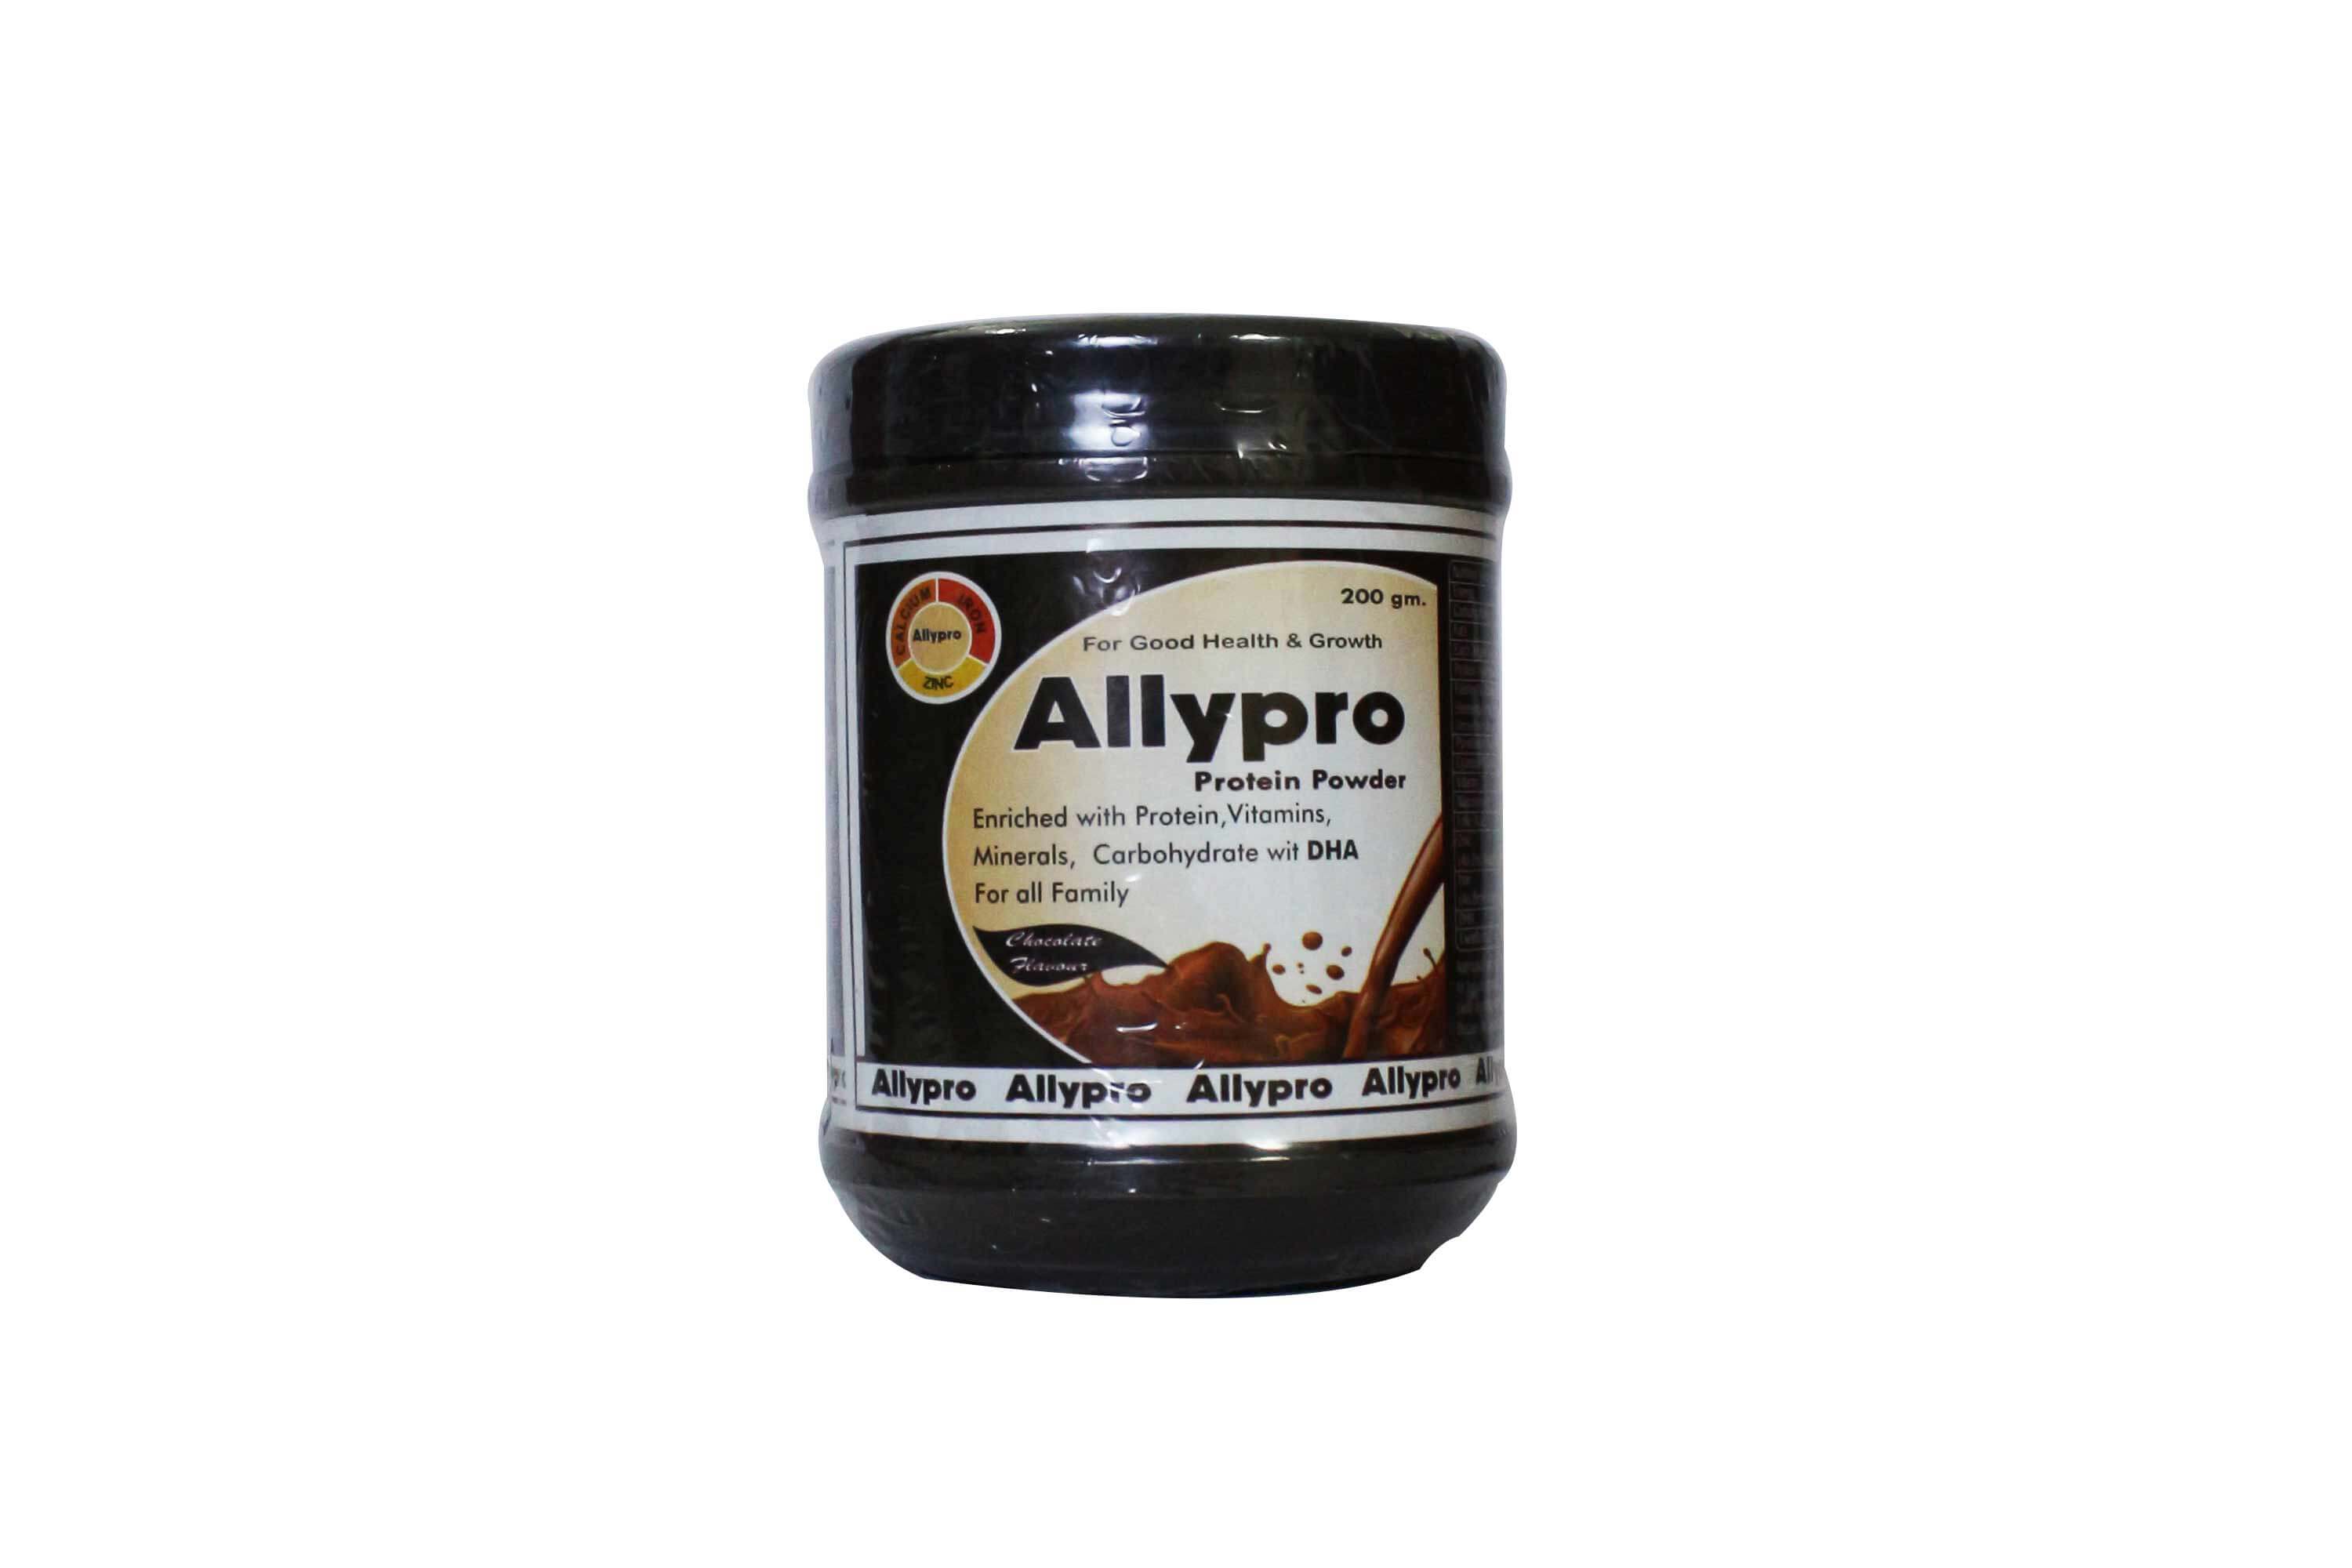 Product Name: Allypro, Compositions of Allypro are Enriched with Protein, Vitamins , Minerals Carbohydrate with DHA  - Numantis Healthcare